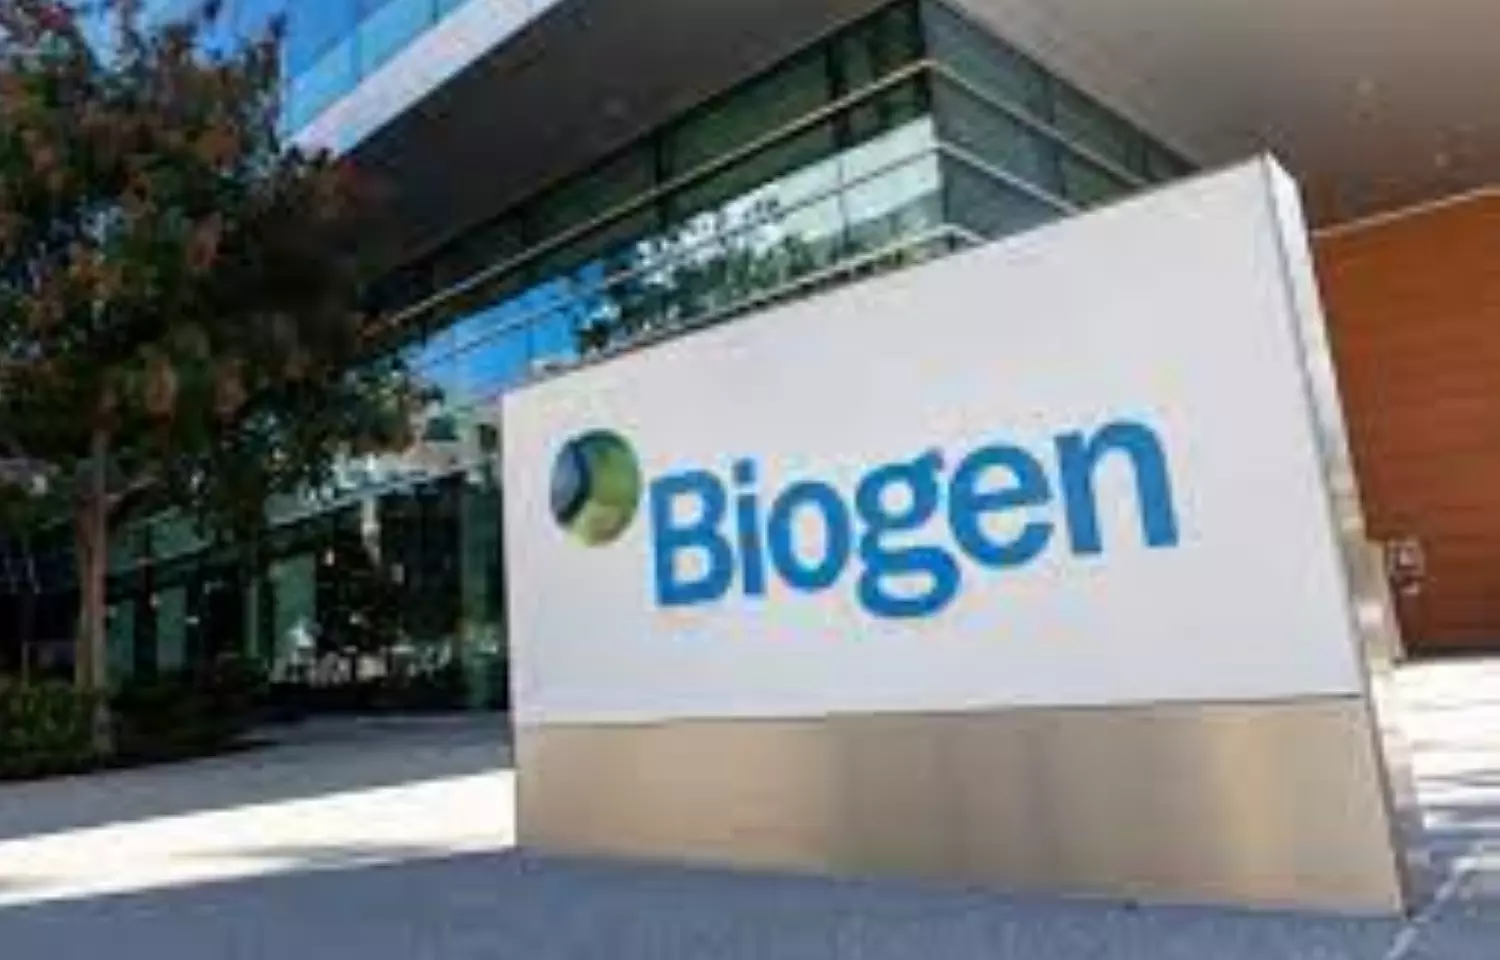 Biogen shares slide as Medicare restricts cover of Alzheimers treatments